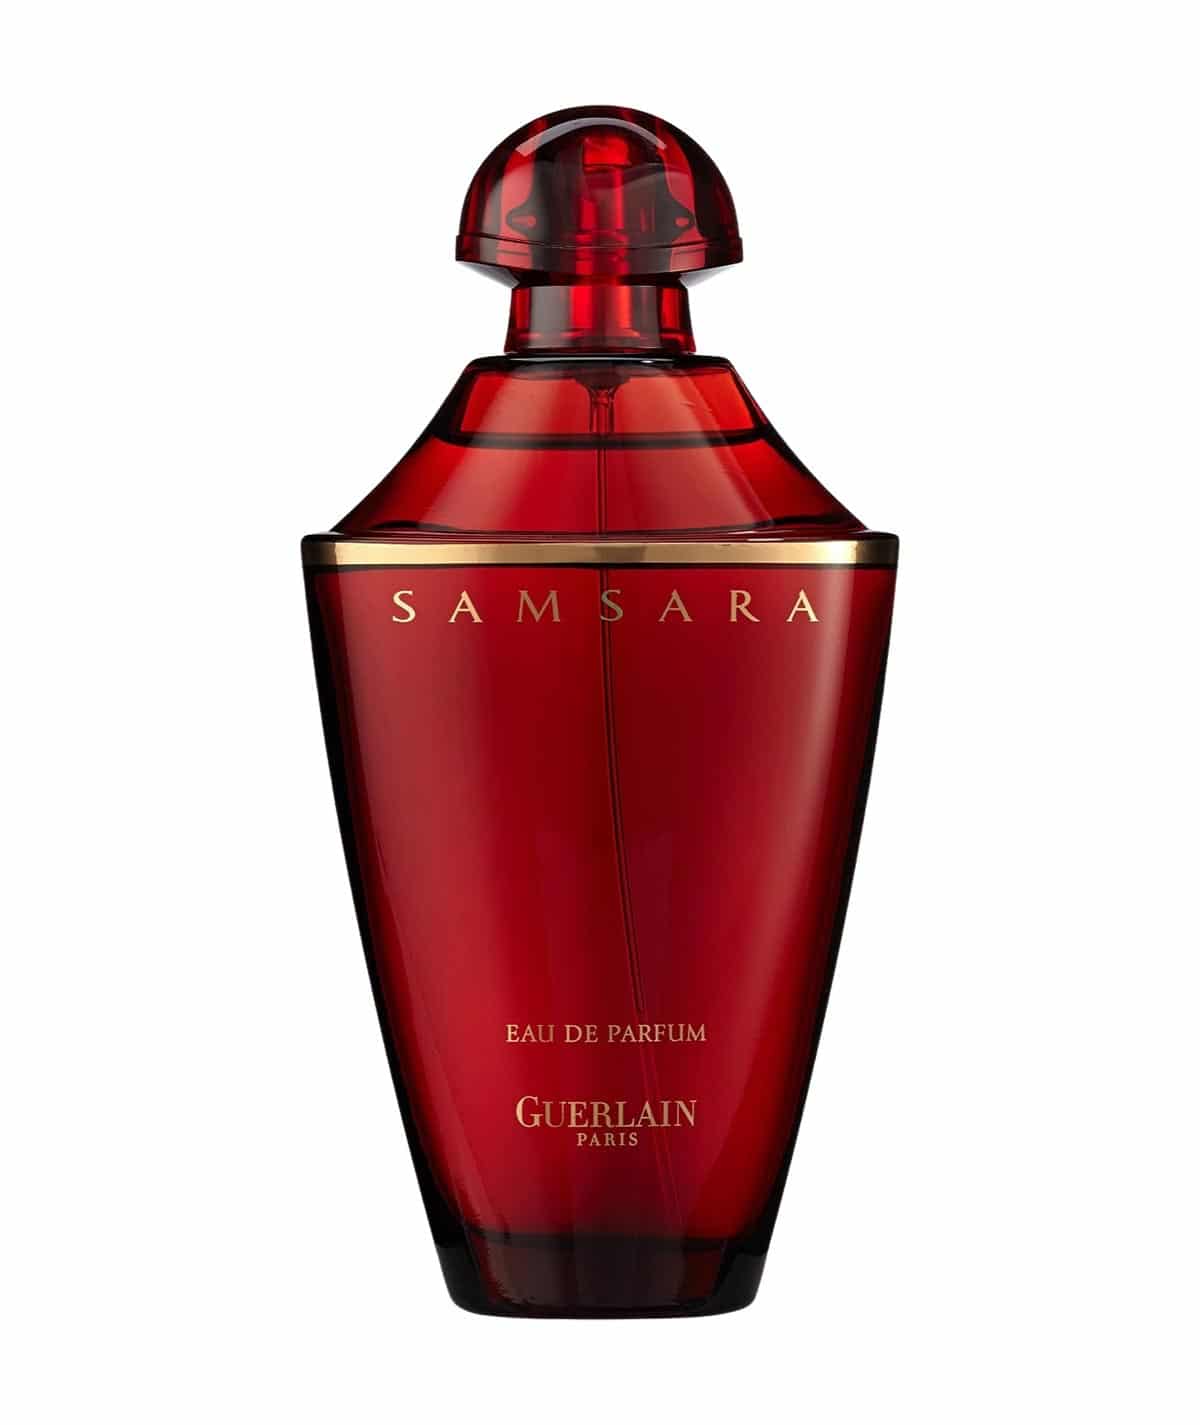 Perfumes In A Red Bottle - FragranceReview.com